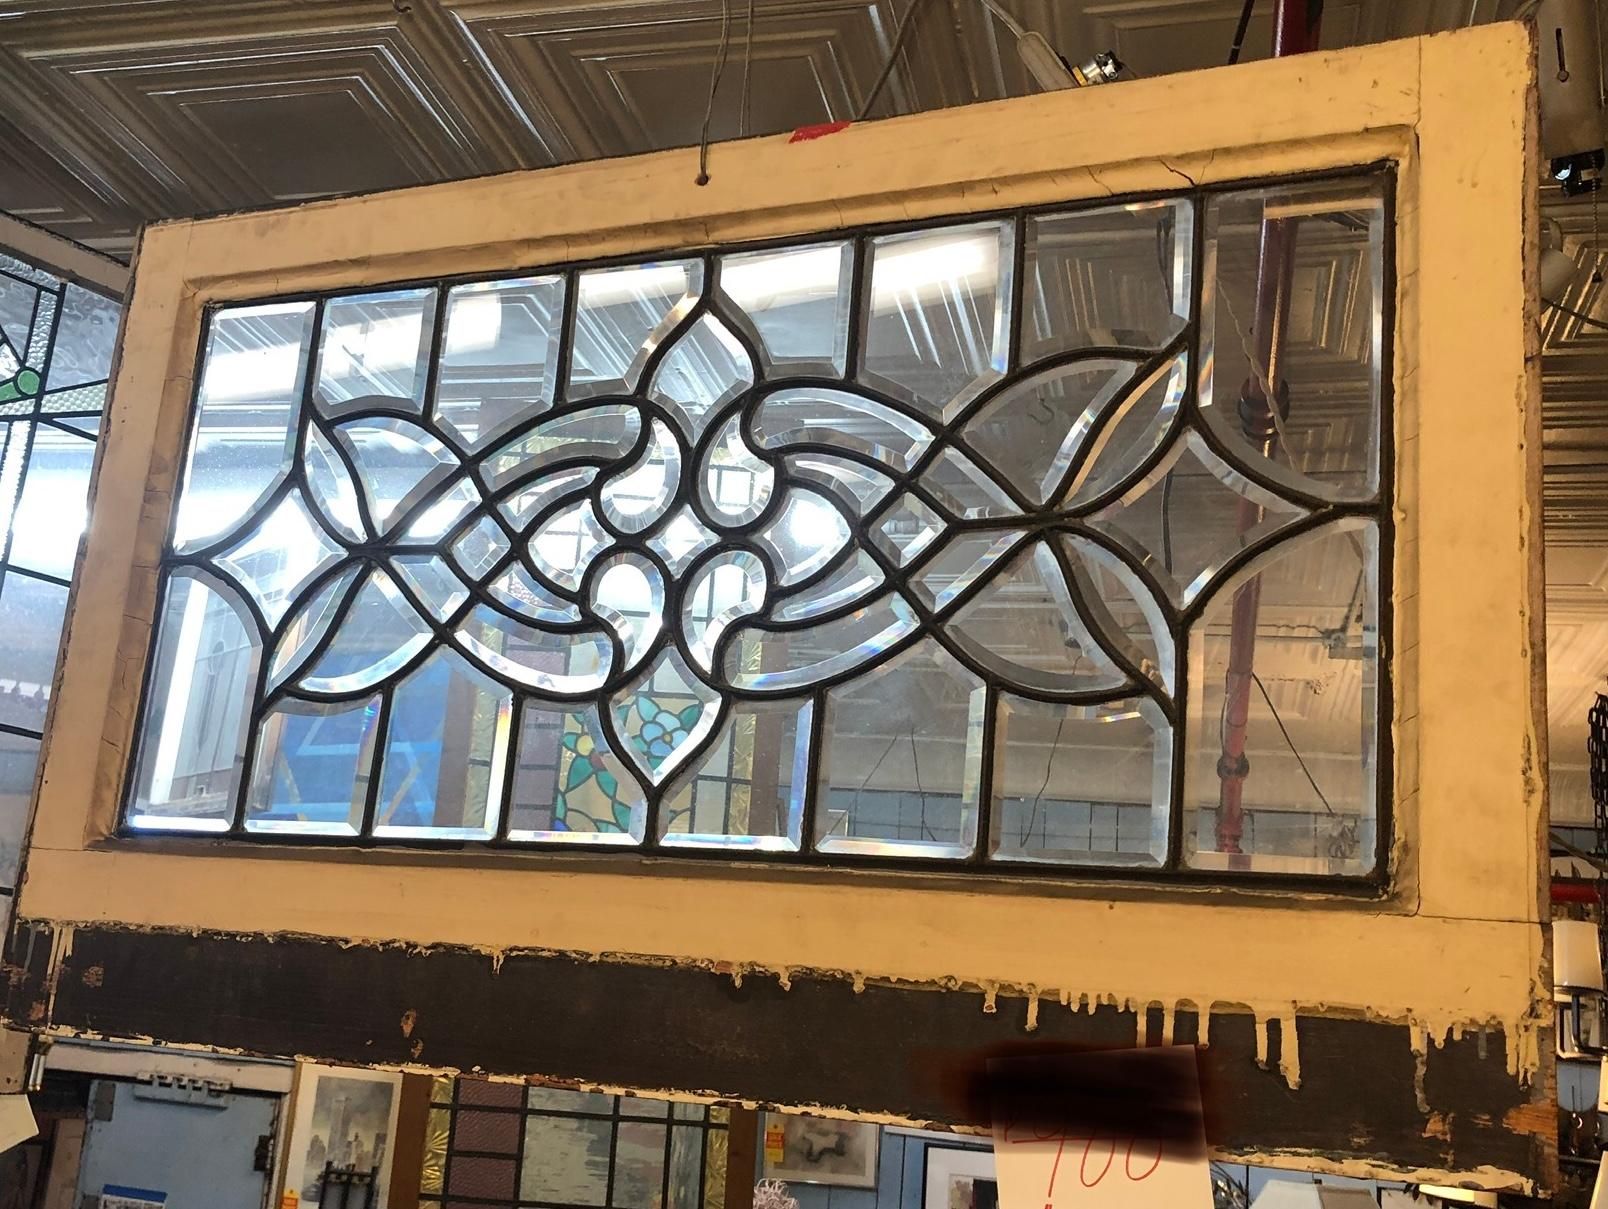 American glass window with lead design. Beautiful arranged design of beveled glass pieces.
Currently housed in a temporary wooden frame - the overall dimensions are for the stained glass and the frame.
Located in NY